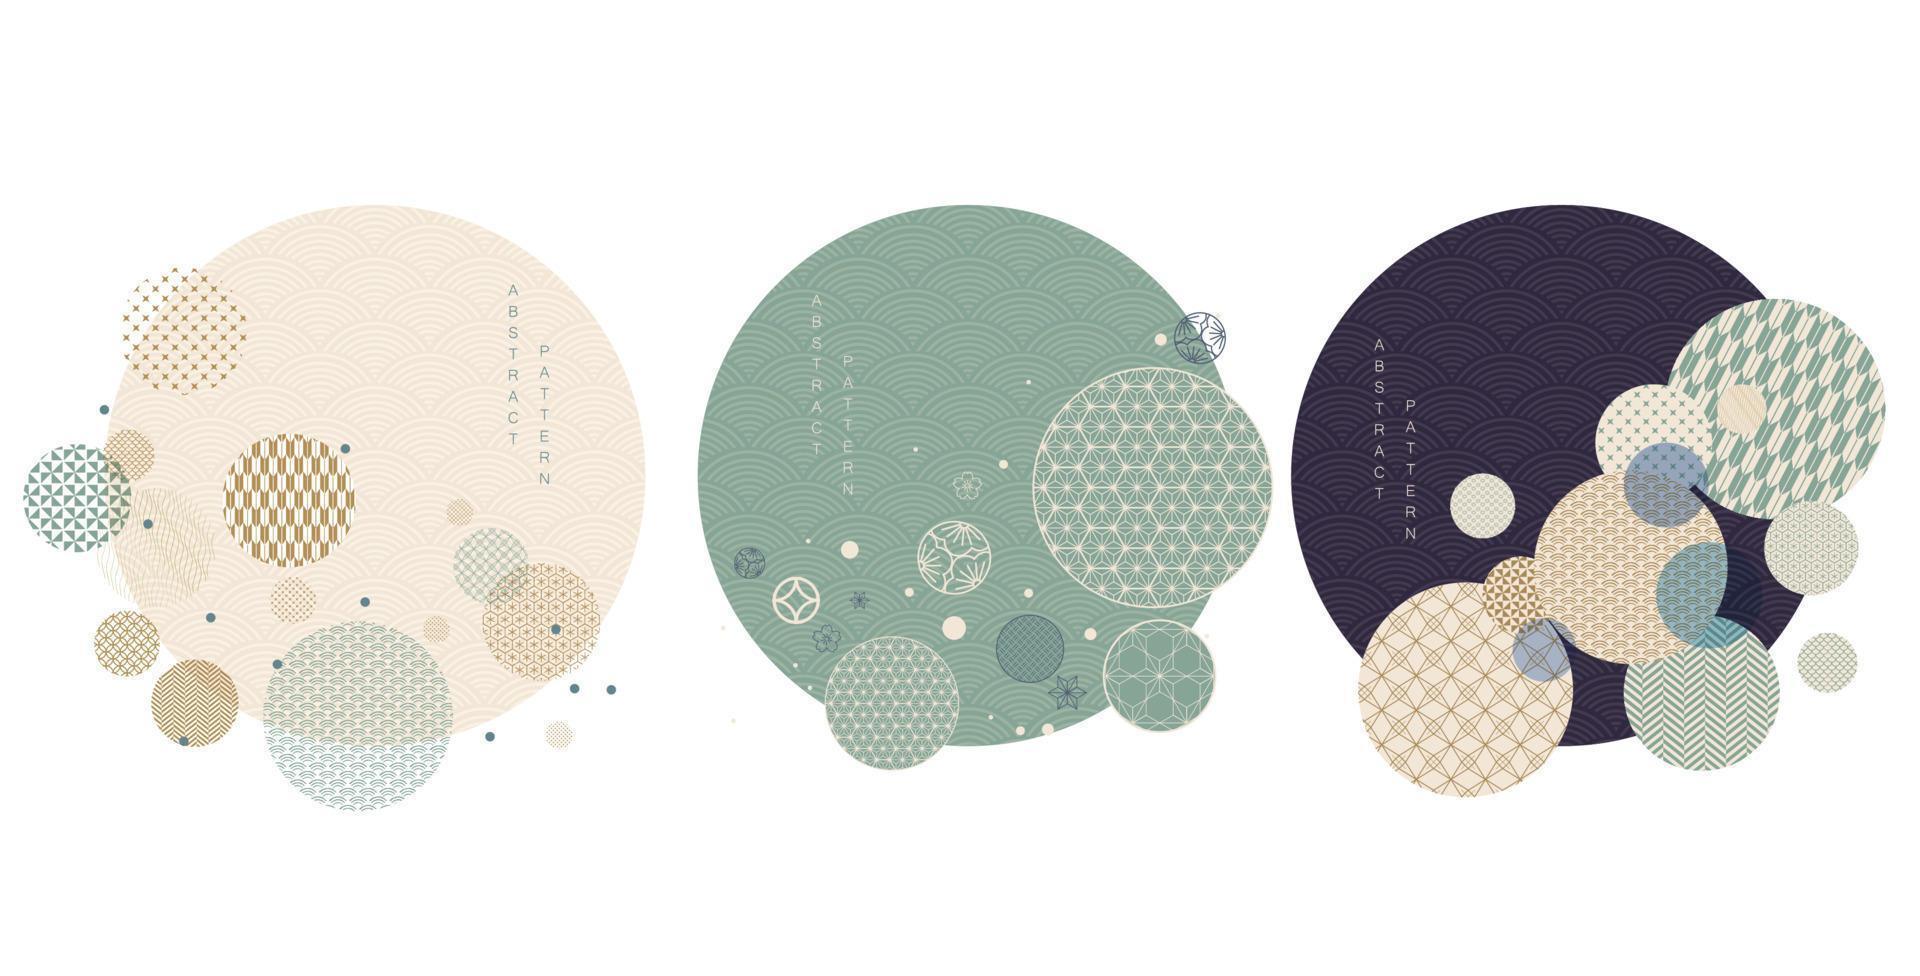 Abstract arts background with Japanese pattern vector. Circle logo design with geometric elements in vintage style. vector